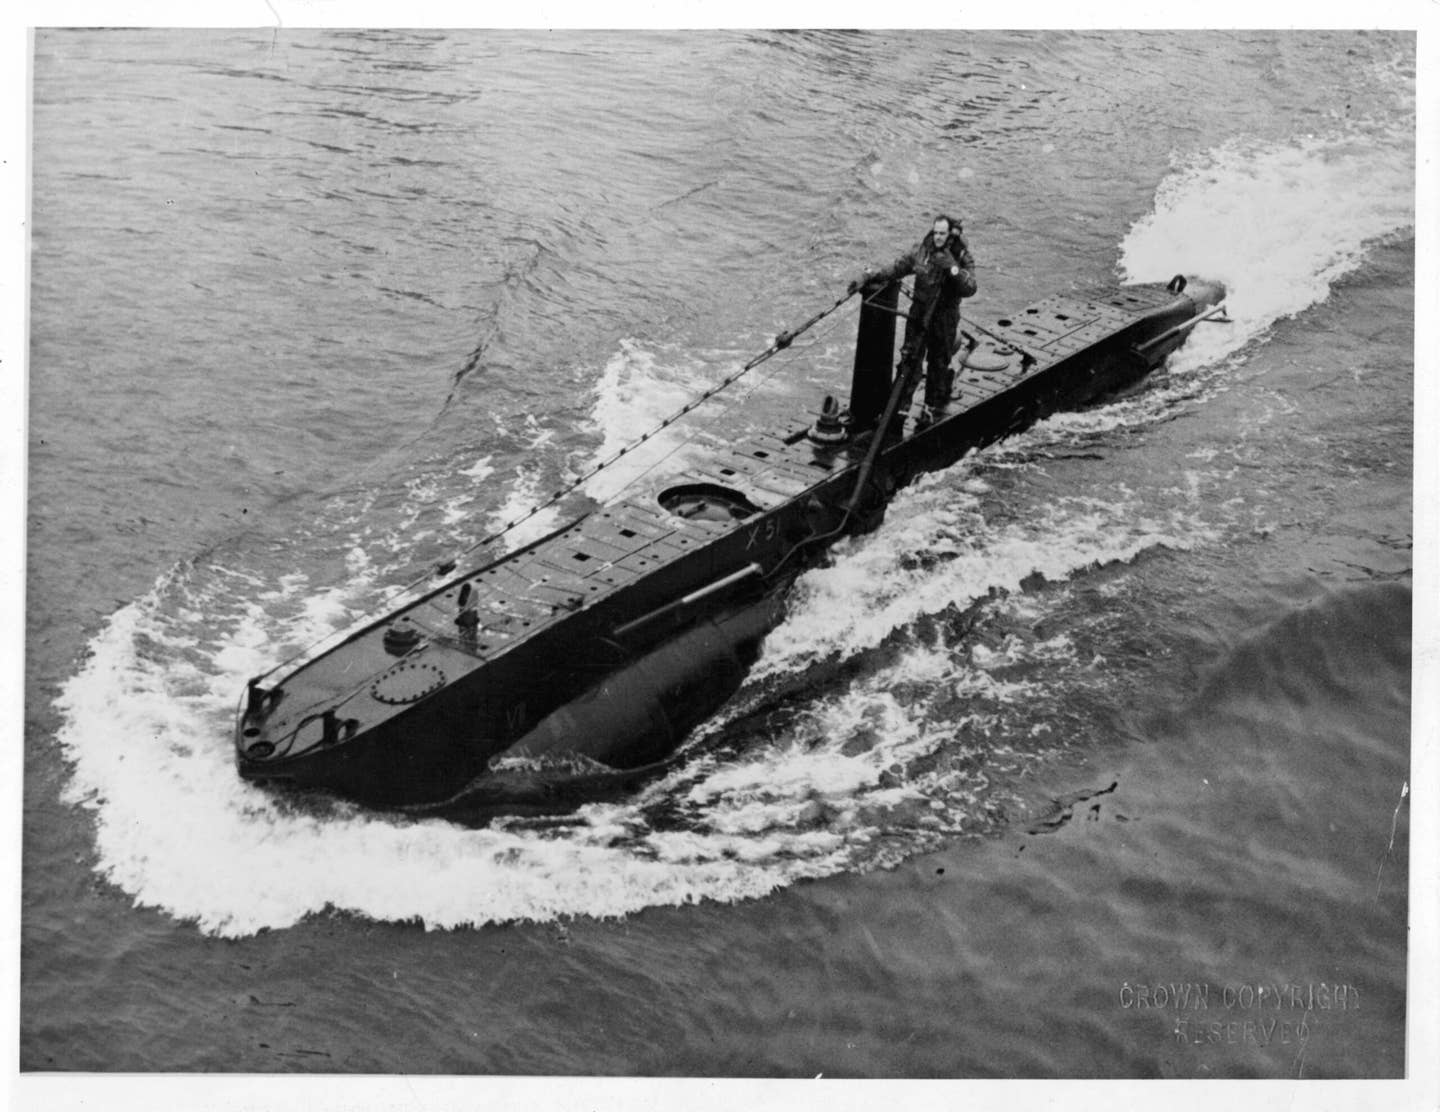 A view of X 51 <em>Stickleback</em> miniature submarine part of the Royal Navy in England, date unknown. <em>Photo by Authenticated News/Archive Photos/Getty Images</em>